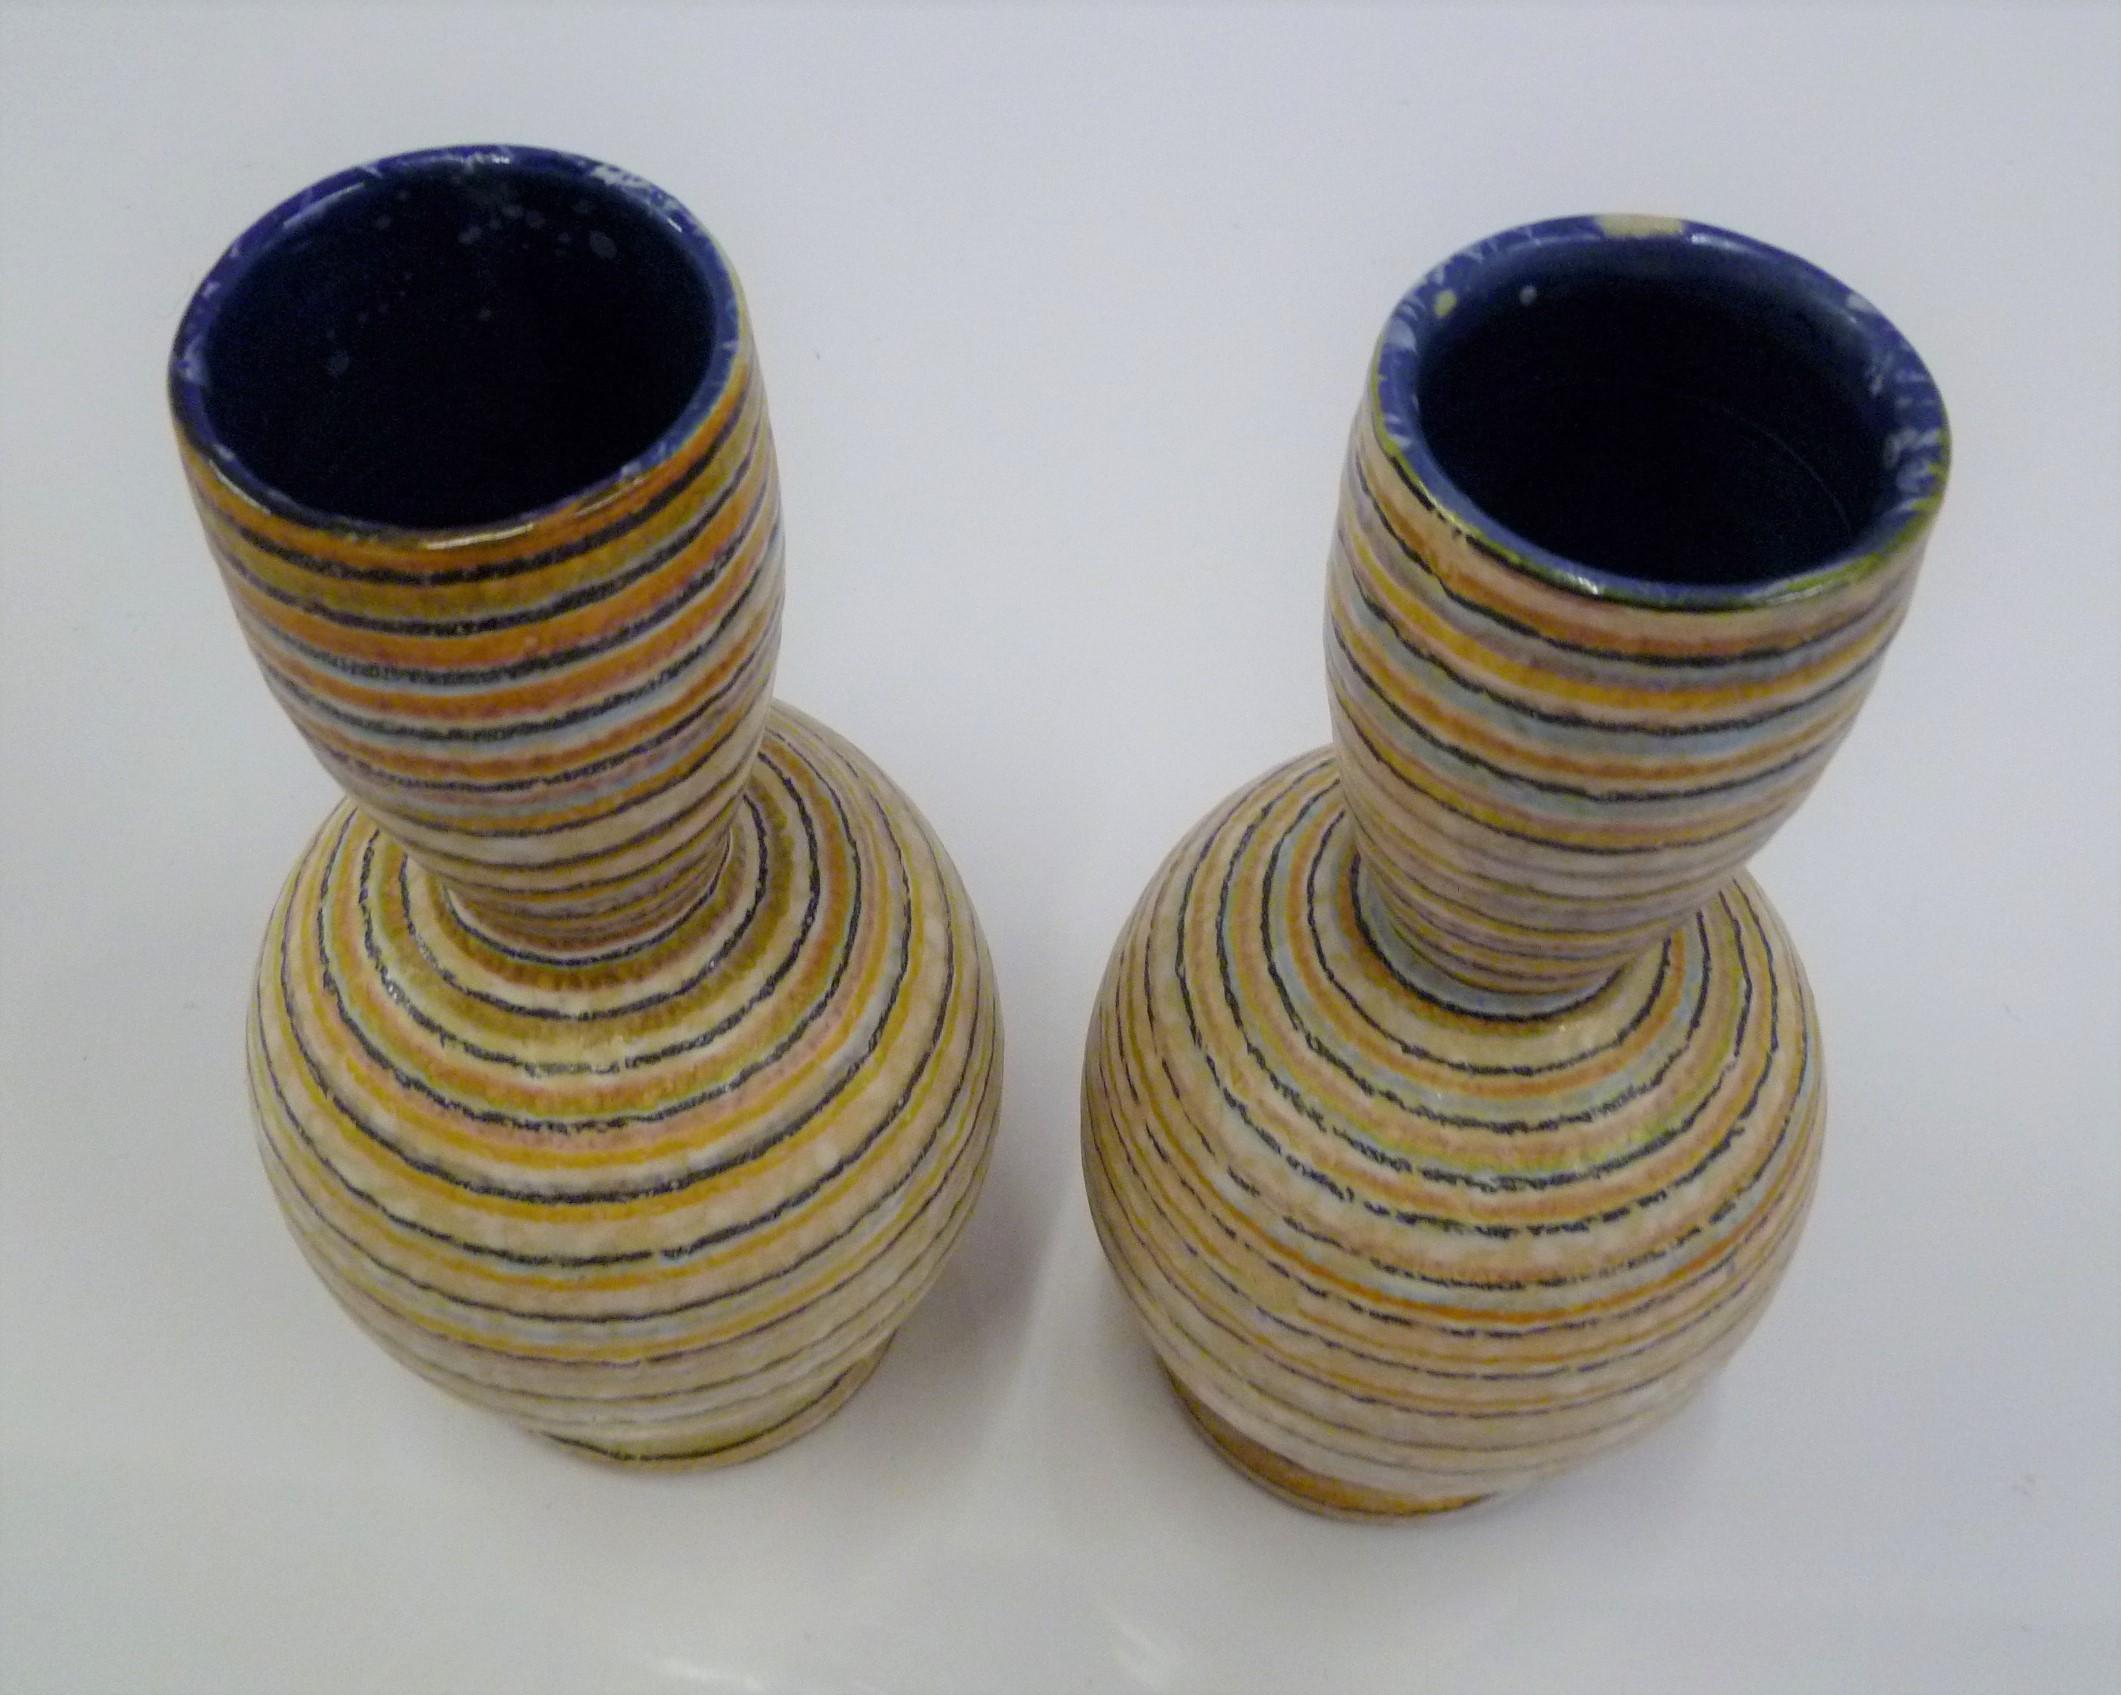 Pair of midcentury Italian Modern pottery vases handmade in Italy for the retailer Guildcraft from the 1960s. The shape and colorful bands covering their bodies, will brighten any room's decor. Fun and happy, the stripes are painted in tan, black,